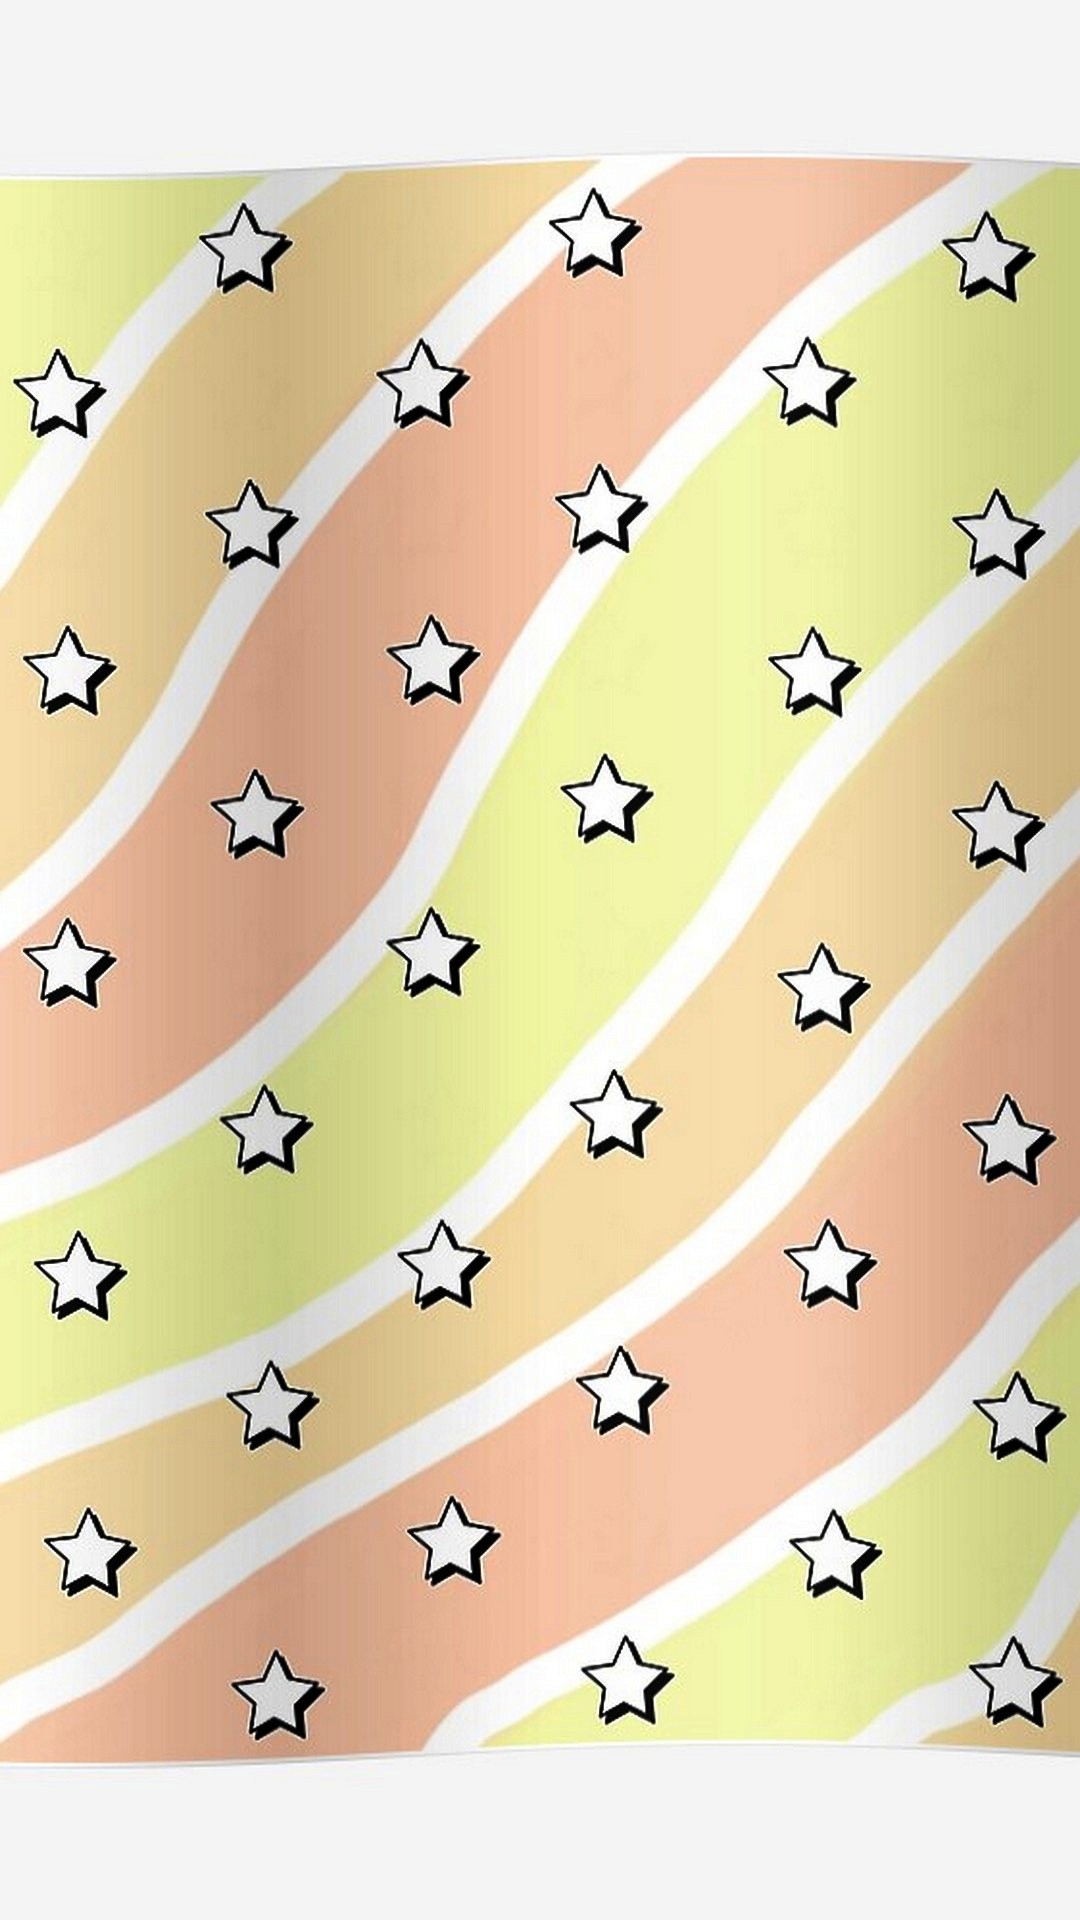 Stars Aesthetic iPhone Wallpaper With high-resolution 1080X1920 pixel. You can use this wallpaper for your iPhone 5, 6, 7, 8, X, XS, XR backgrounds, Mobile Screensaver, or iPad Lock Screen